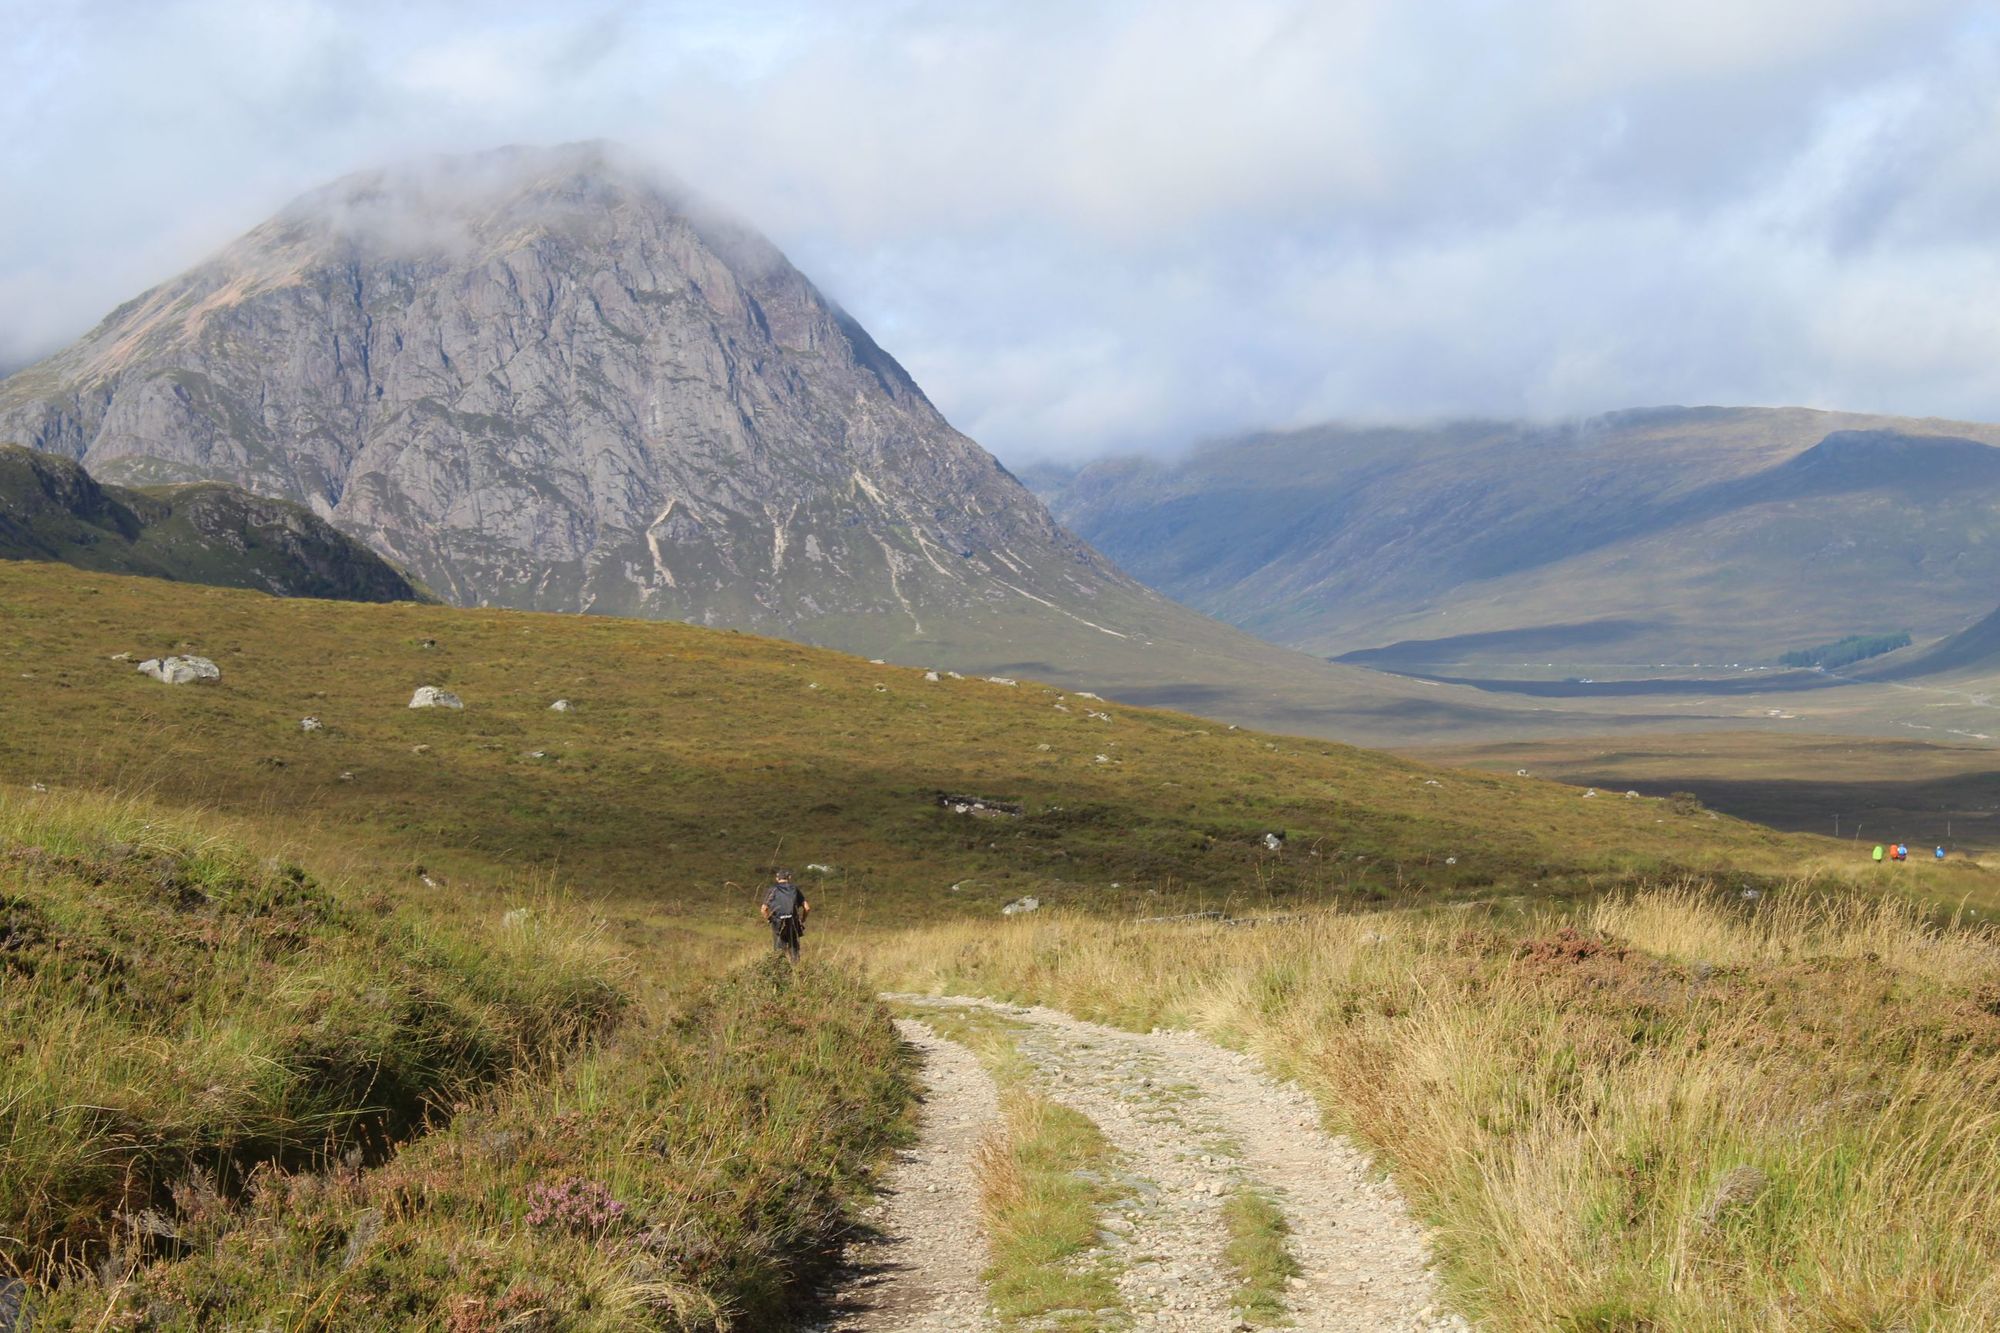 Hiker on the road from Buachaille Etive Mòr, descending down from Rannoch Moor 